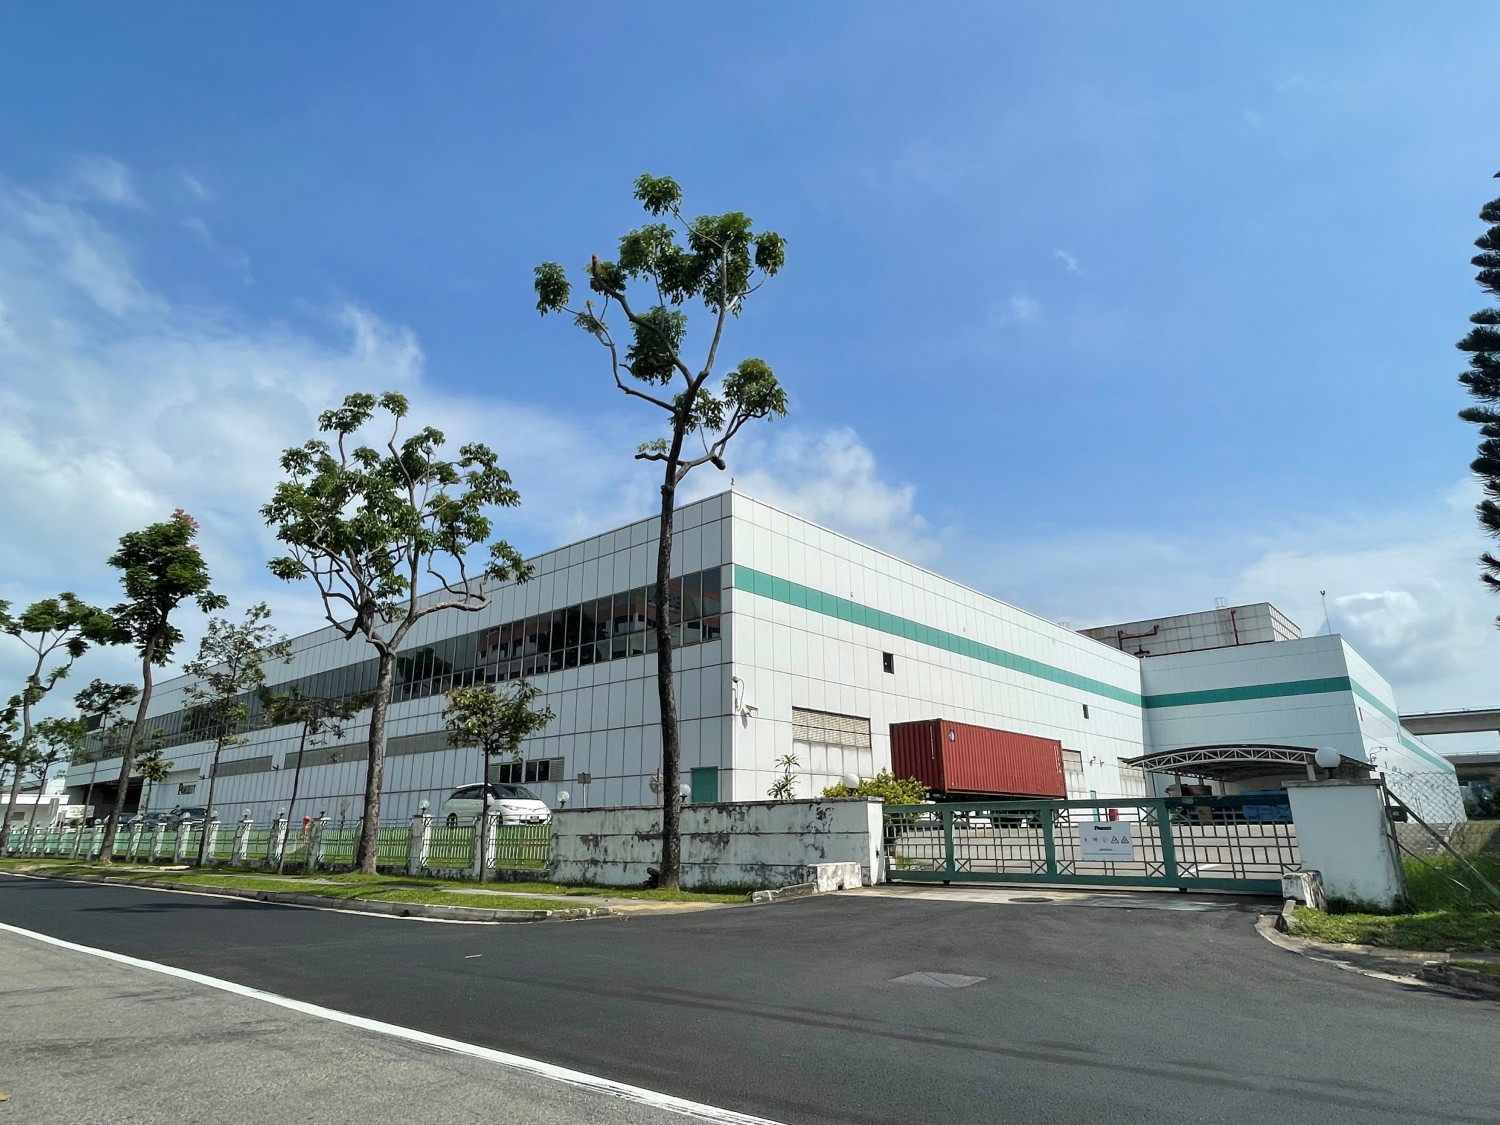 Climate controlled industrial facility at 60 Tuas Ave 11 on the market for $50 mil - Property News